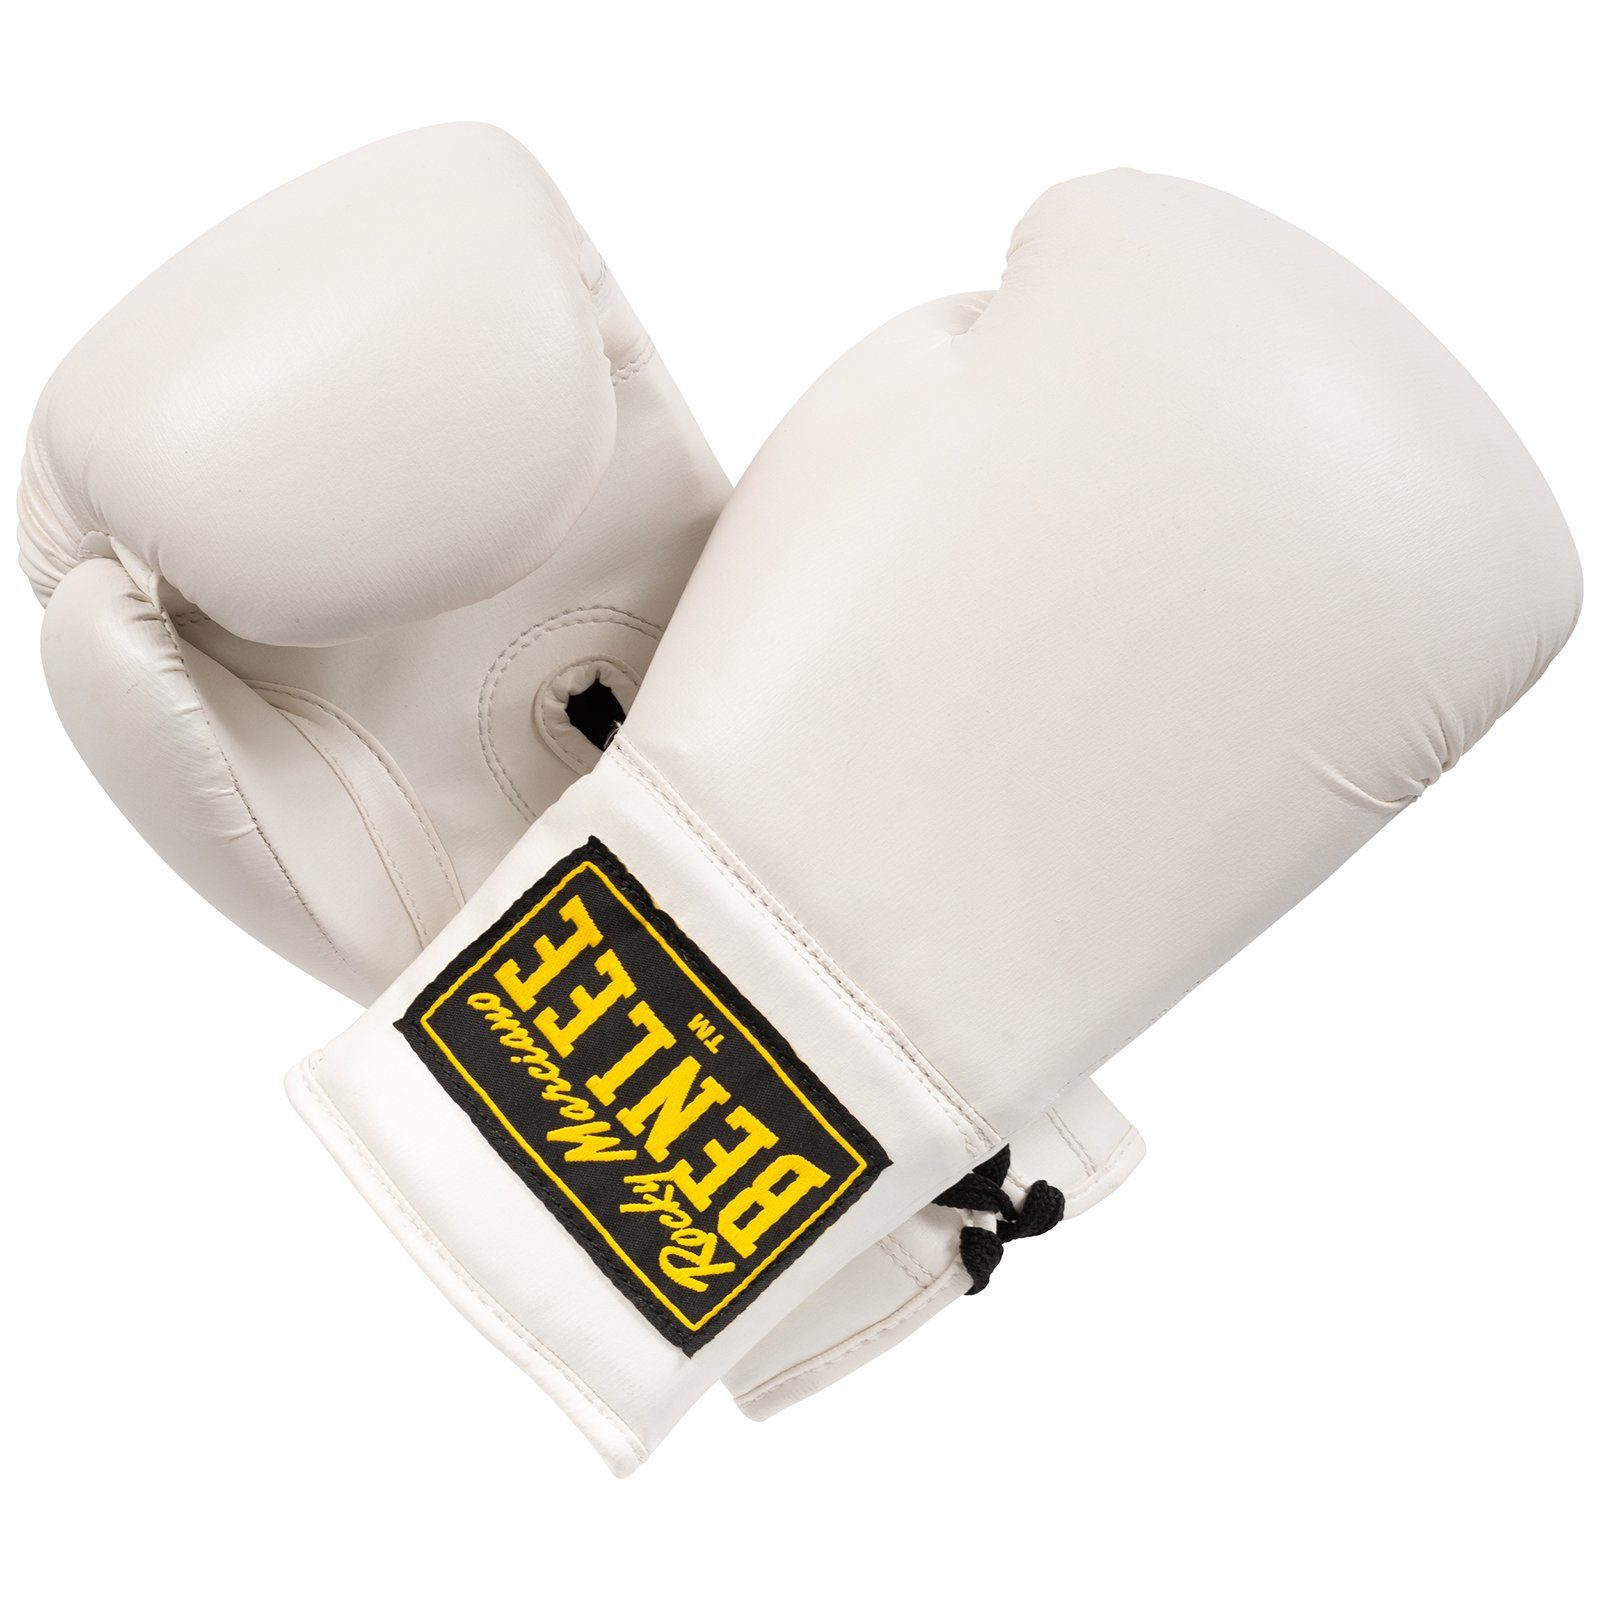 White GLOVES AUTOGRAPH Boxhandschuhe Marciano Benlee Rocky